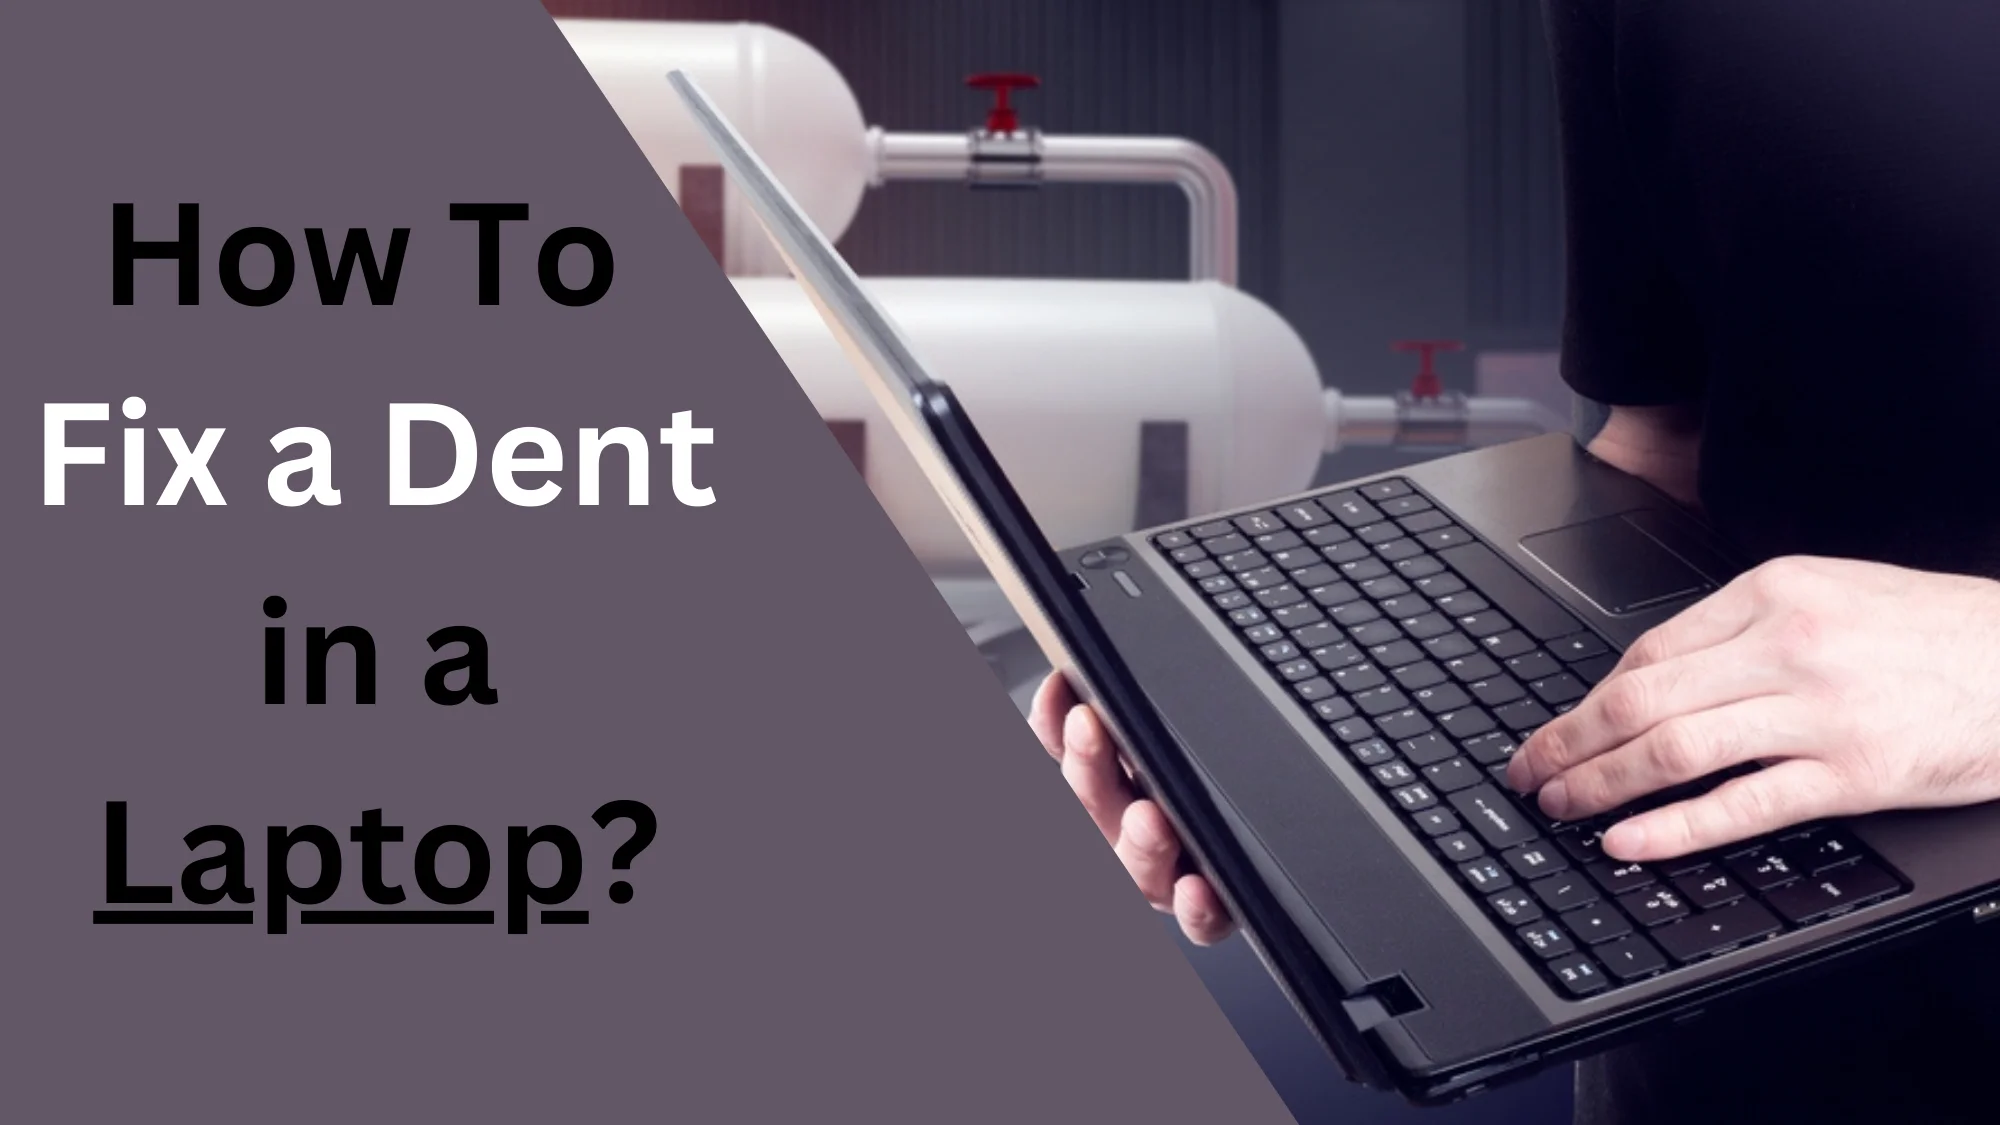 How To Fix a Dent in a Laptop